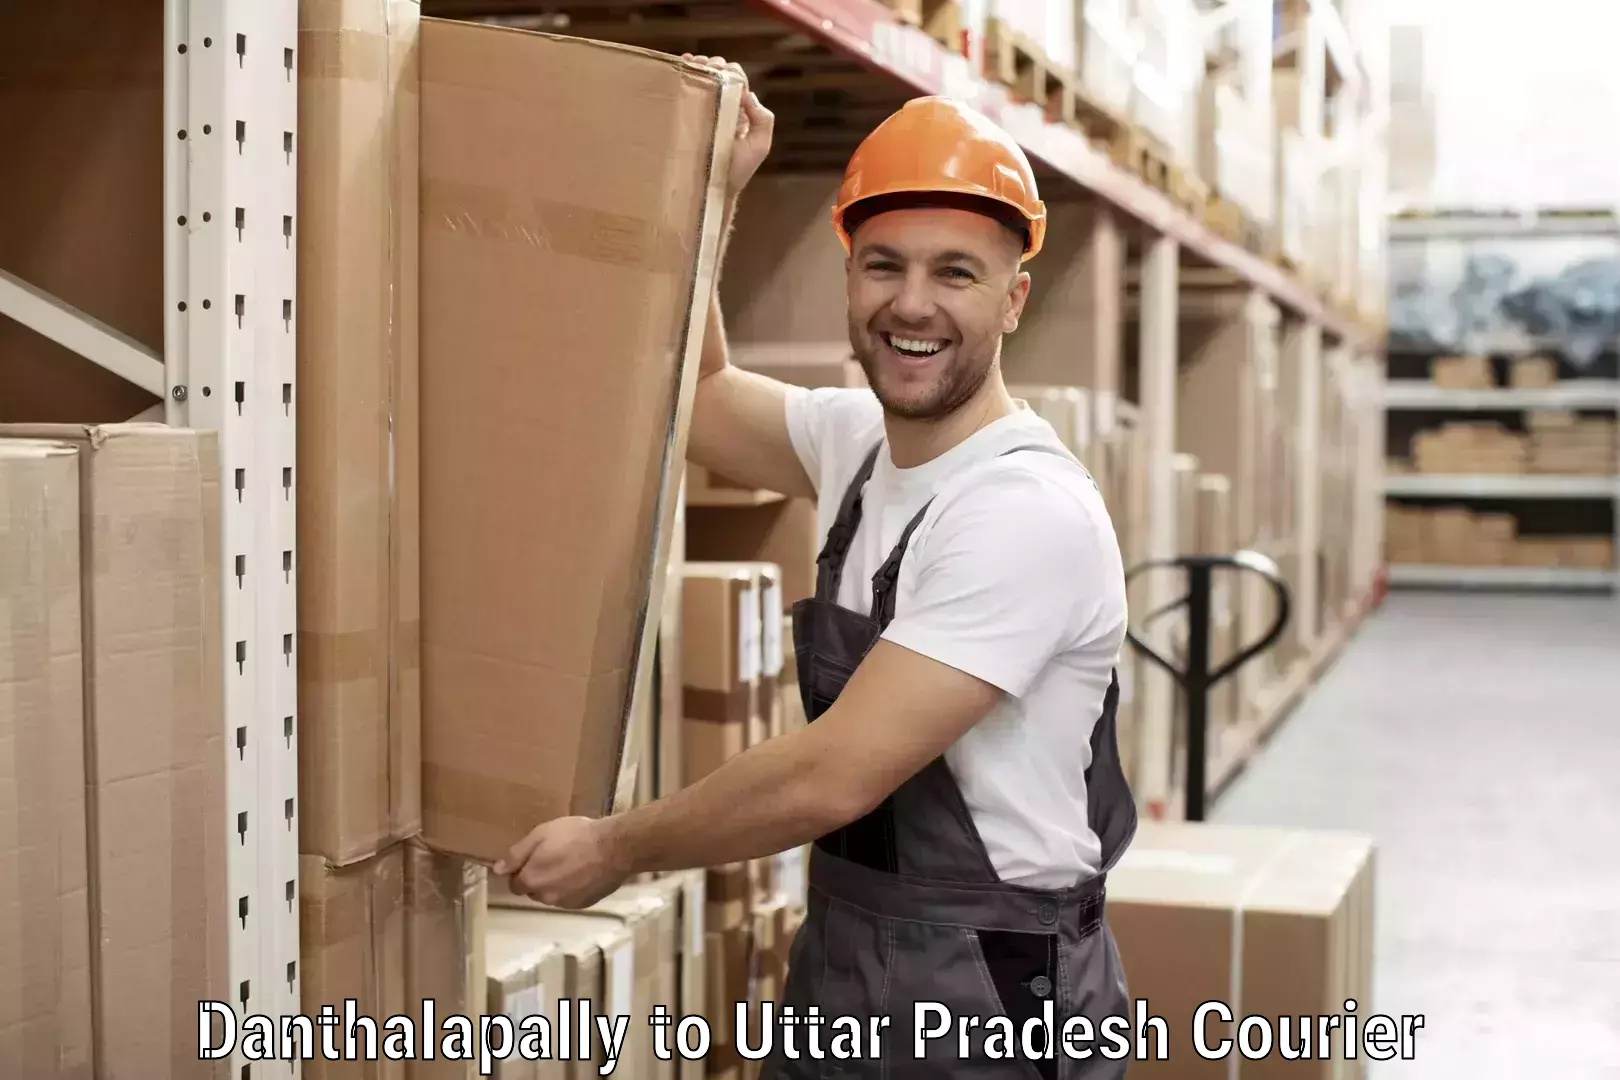 Parcel service for businesses Danthalapally to Uttar Pradesh